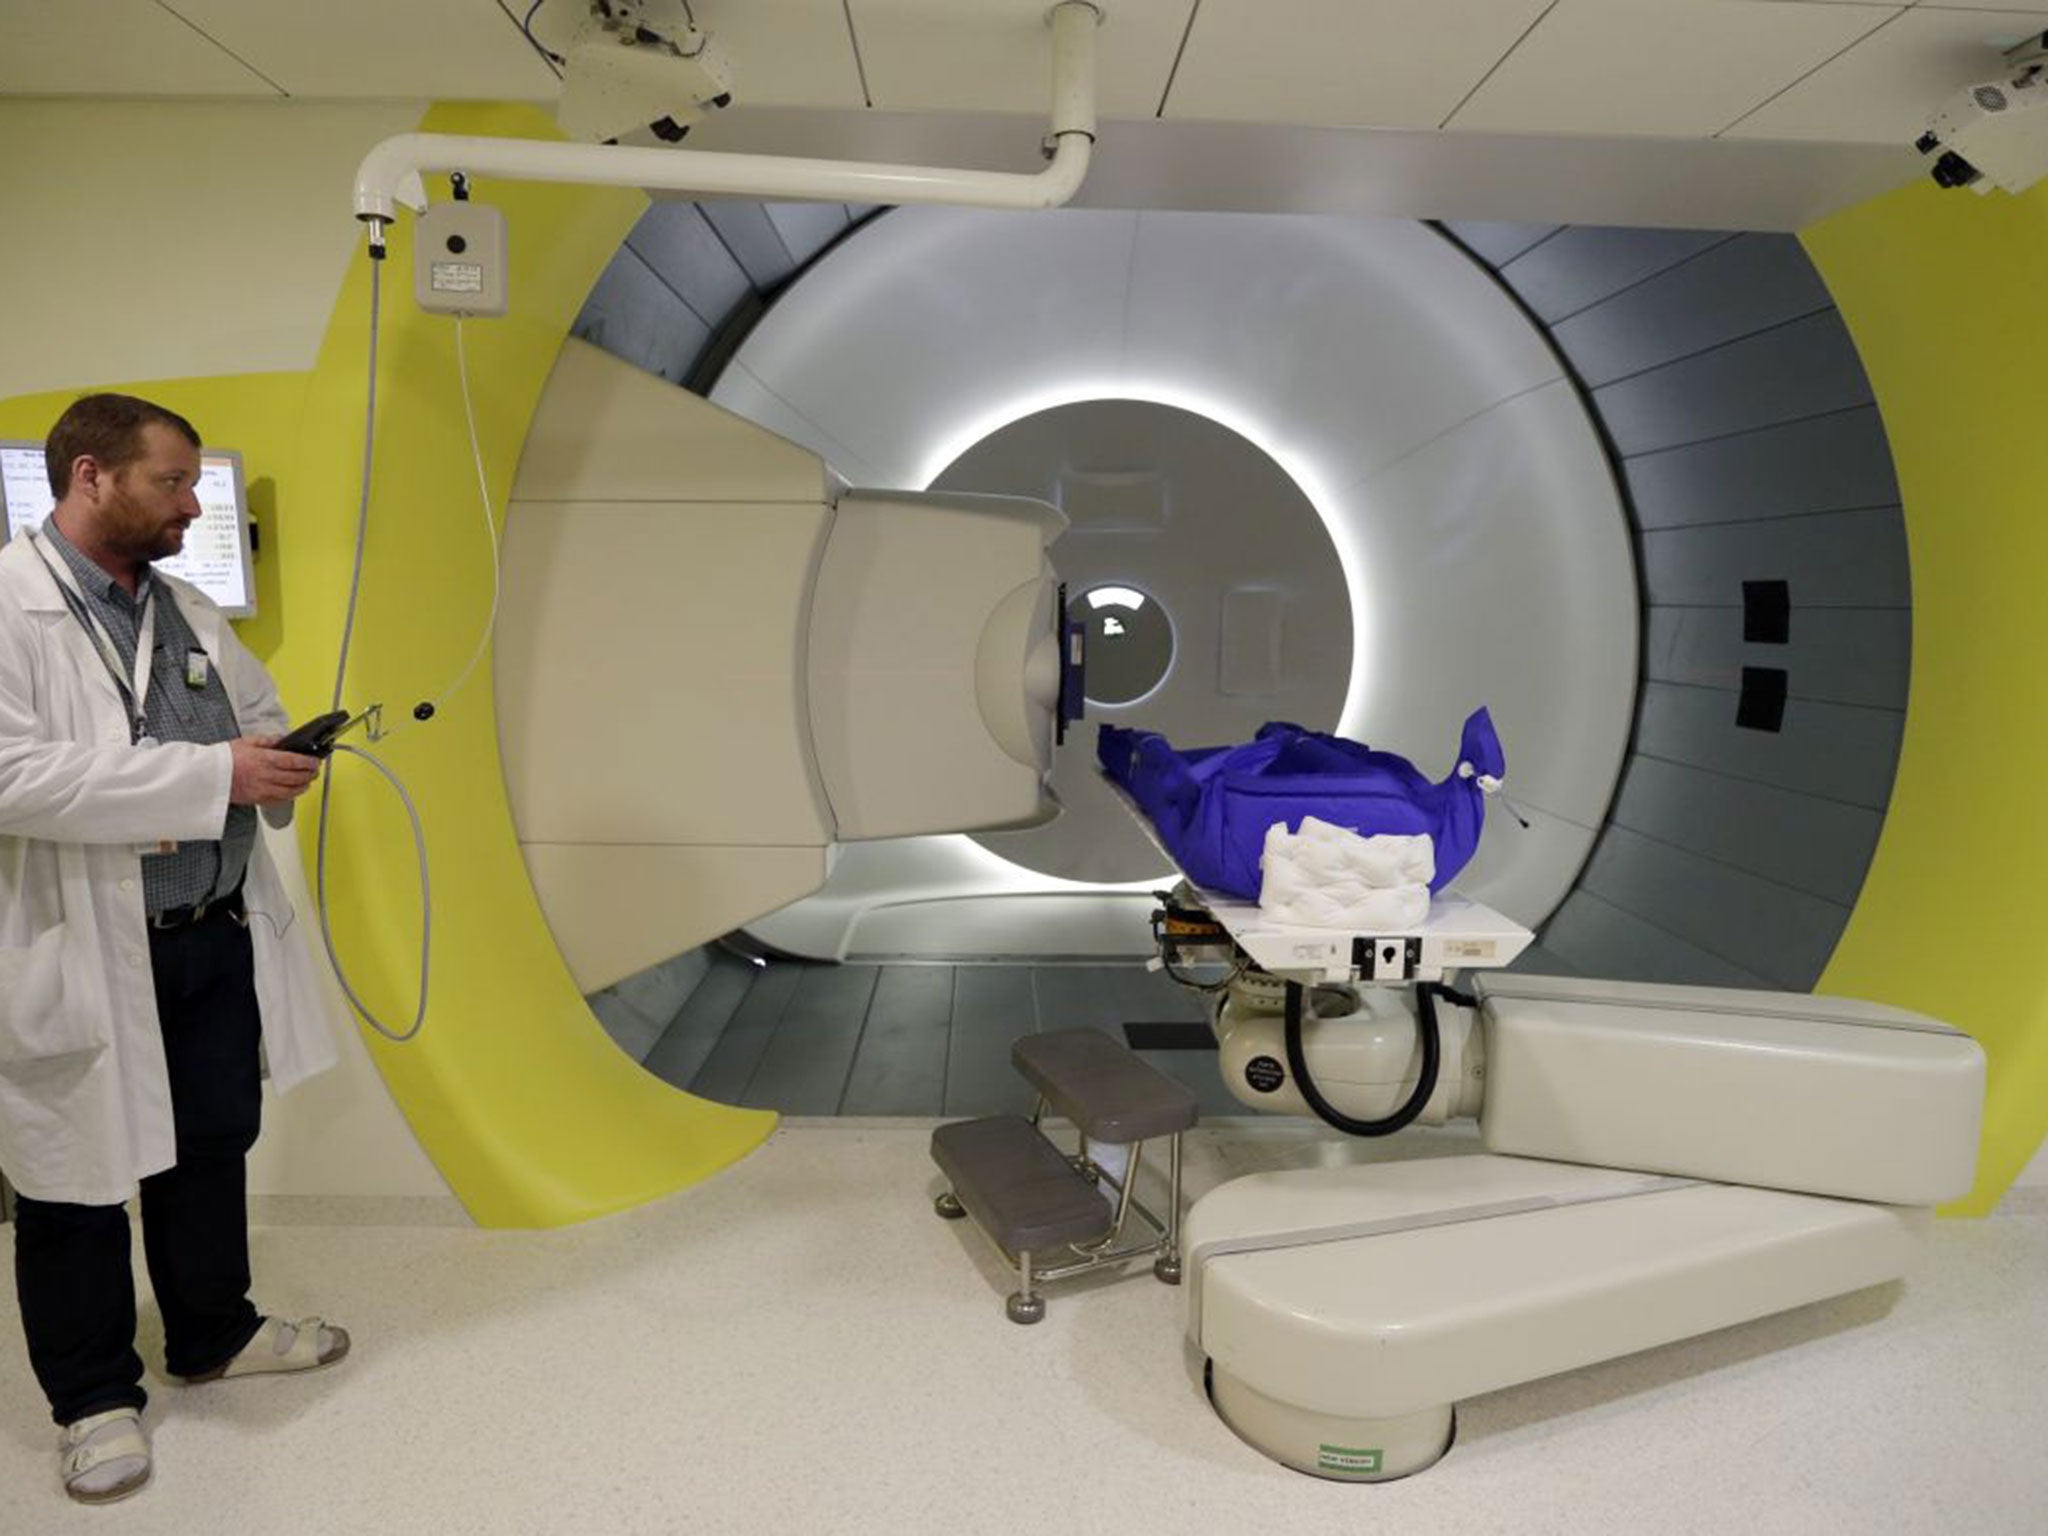 Dr. Vladimir Vondracek operates a machine in a proton therapy treatment room at Proton Therapy Center in Prague, Czech Republic